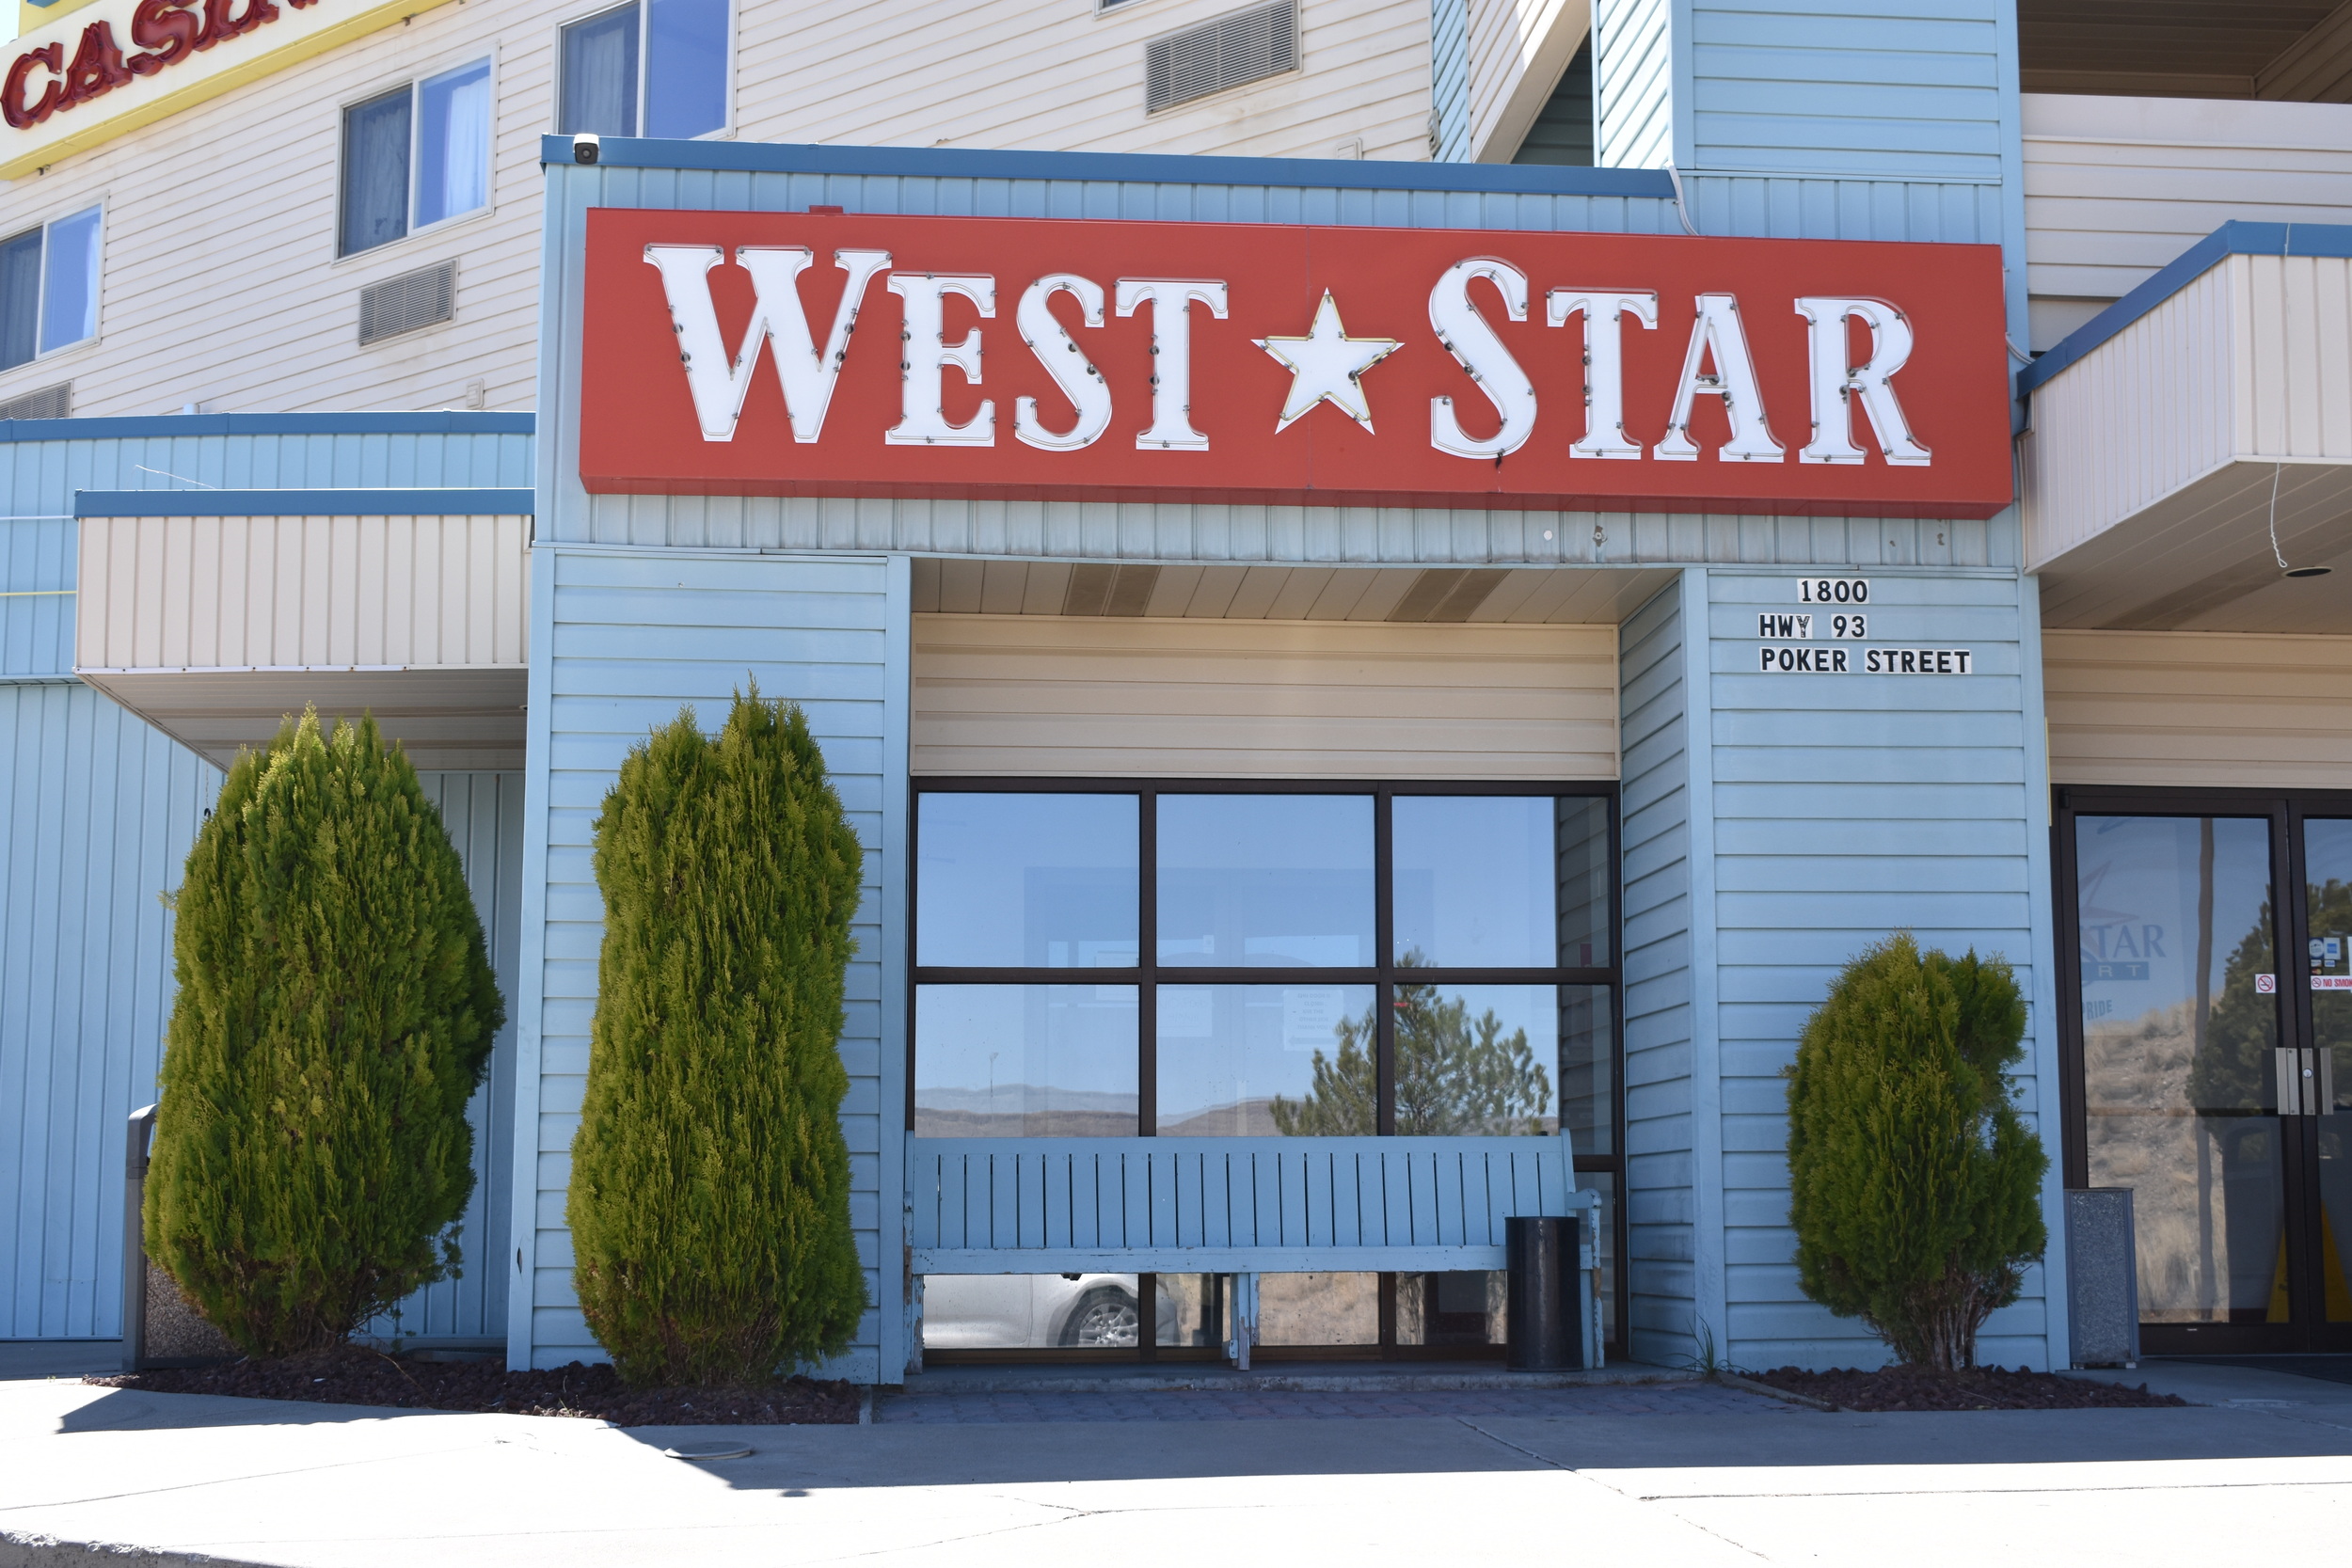 West Star Hotel wall mounted sign, Jackpot, Nevada